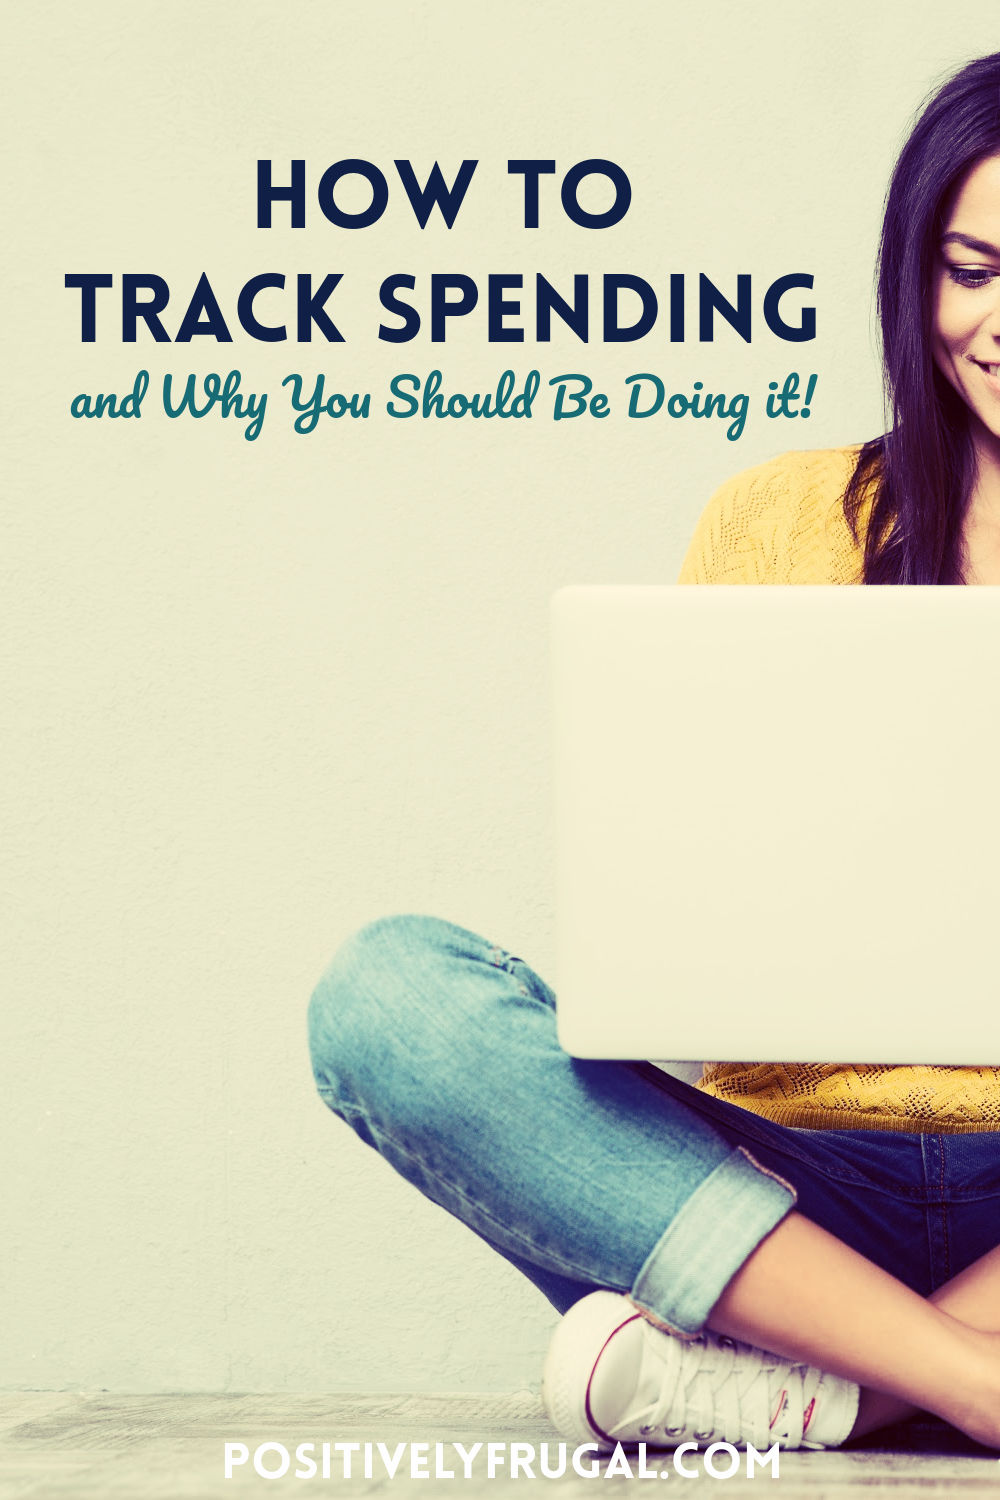 How To Track Spending and Why You Should Be Doing It by PositivelyFrugal.com